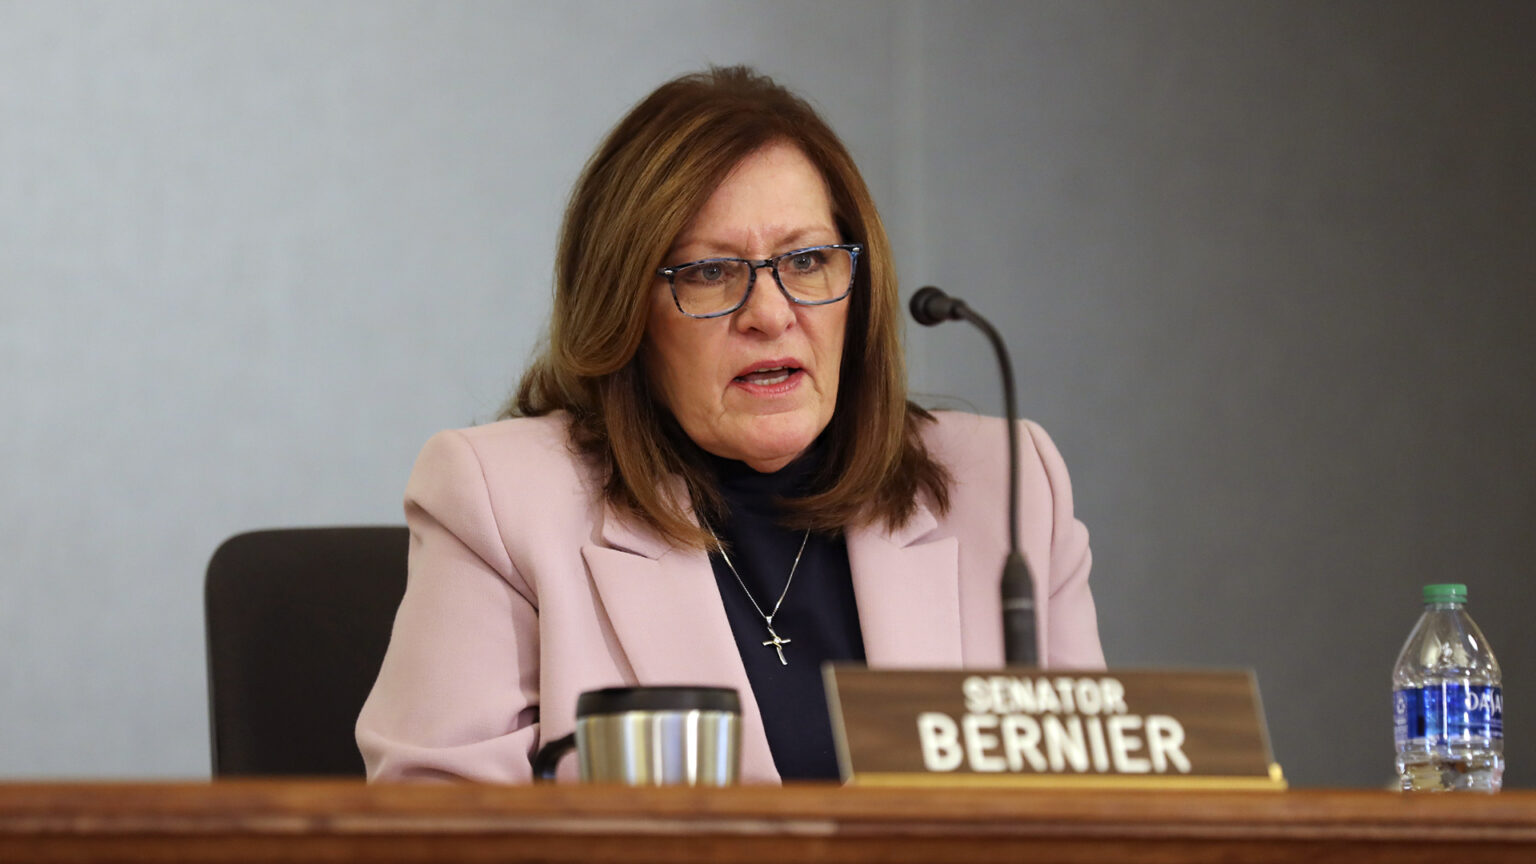 Kathleen Bernier sits at a conference table, speaking into a microphone and behind a nameplate reading Senator Bernier.